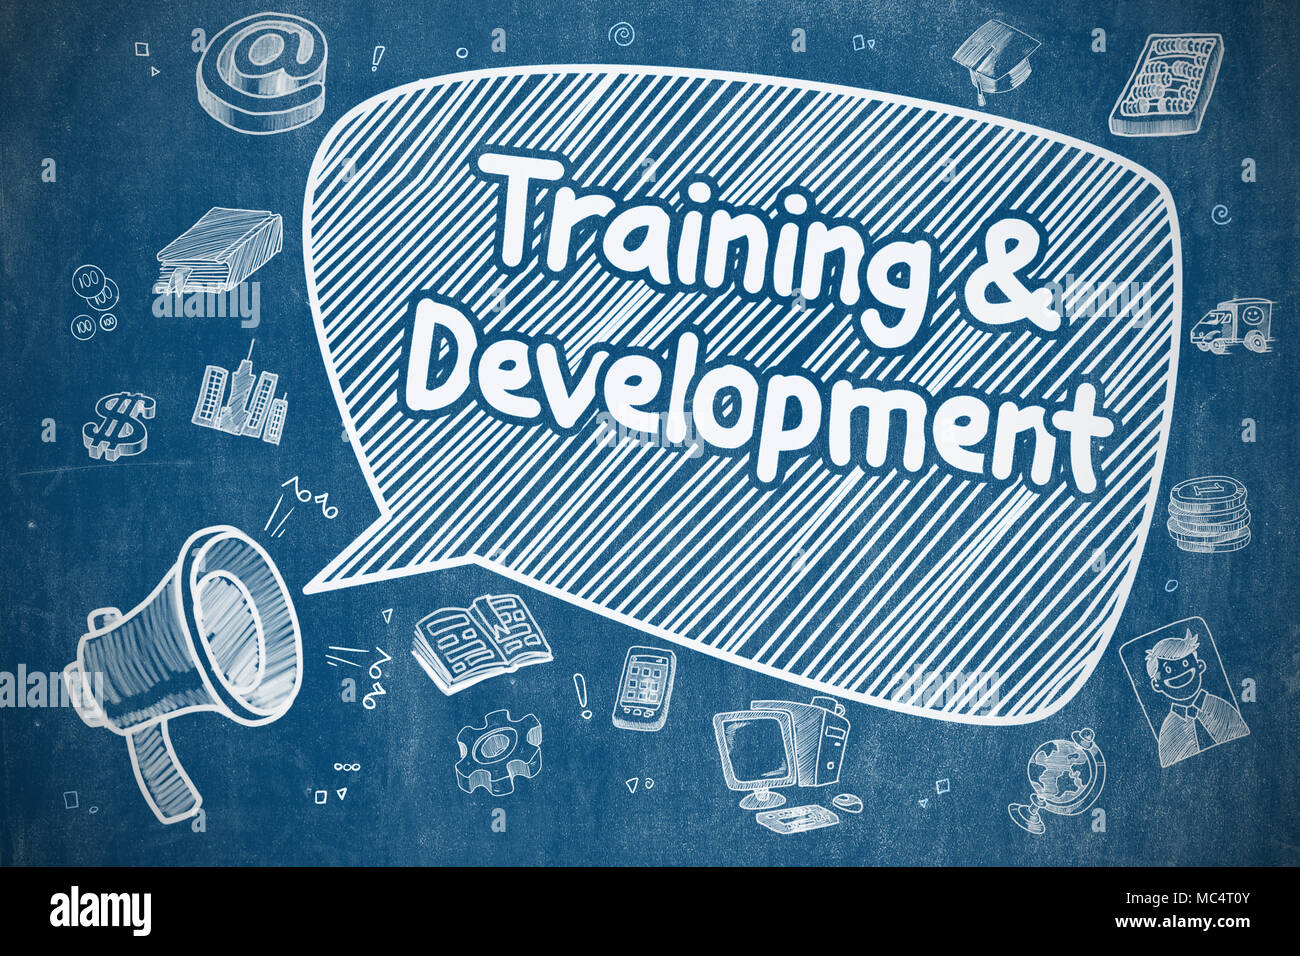 Training And Development - Business Concept. Stock Photo